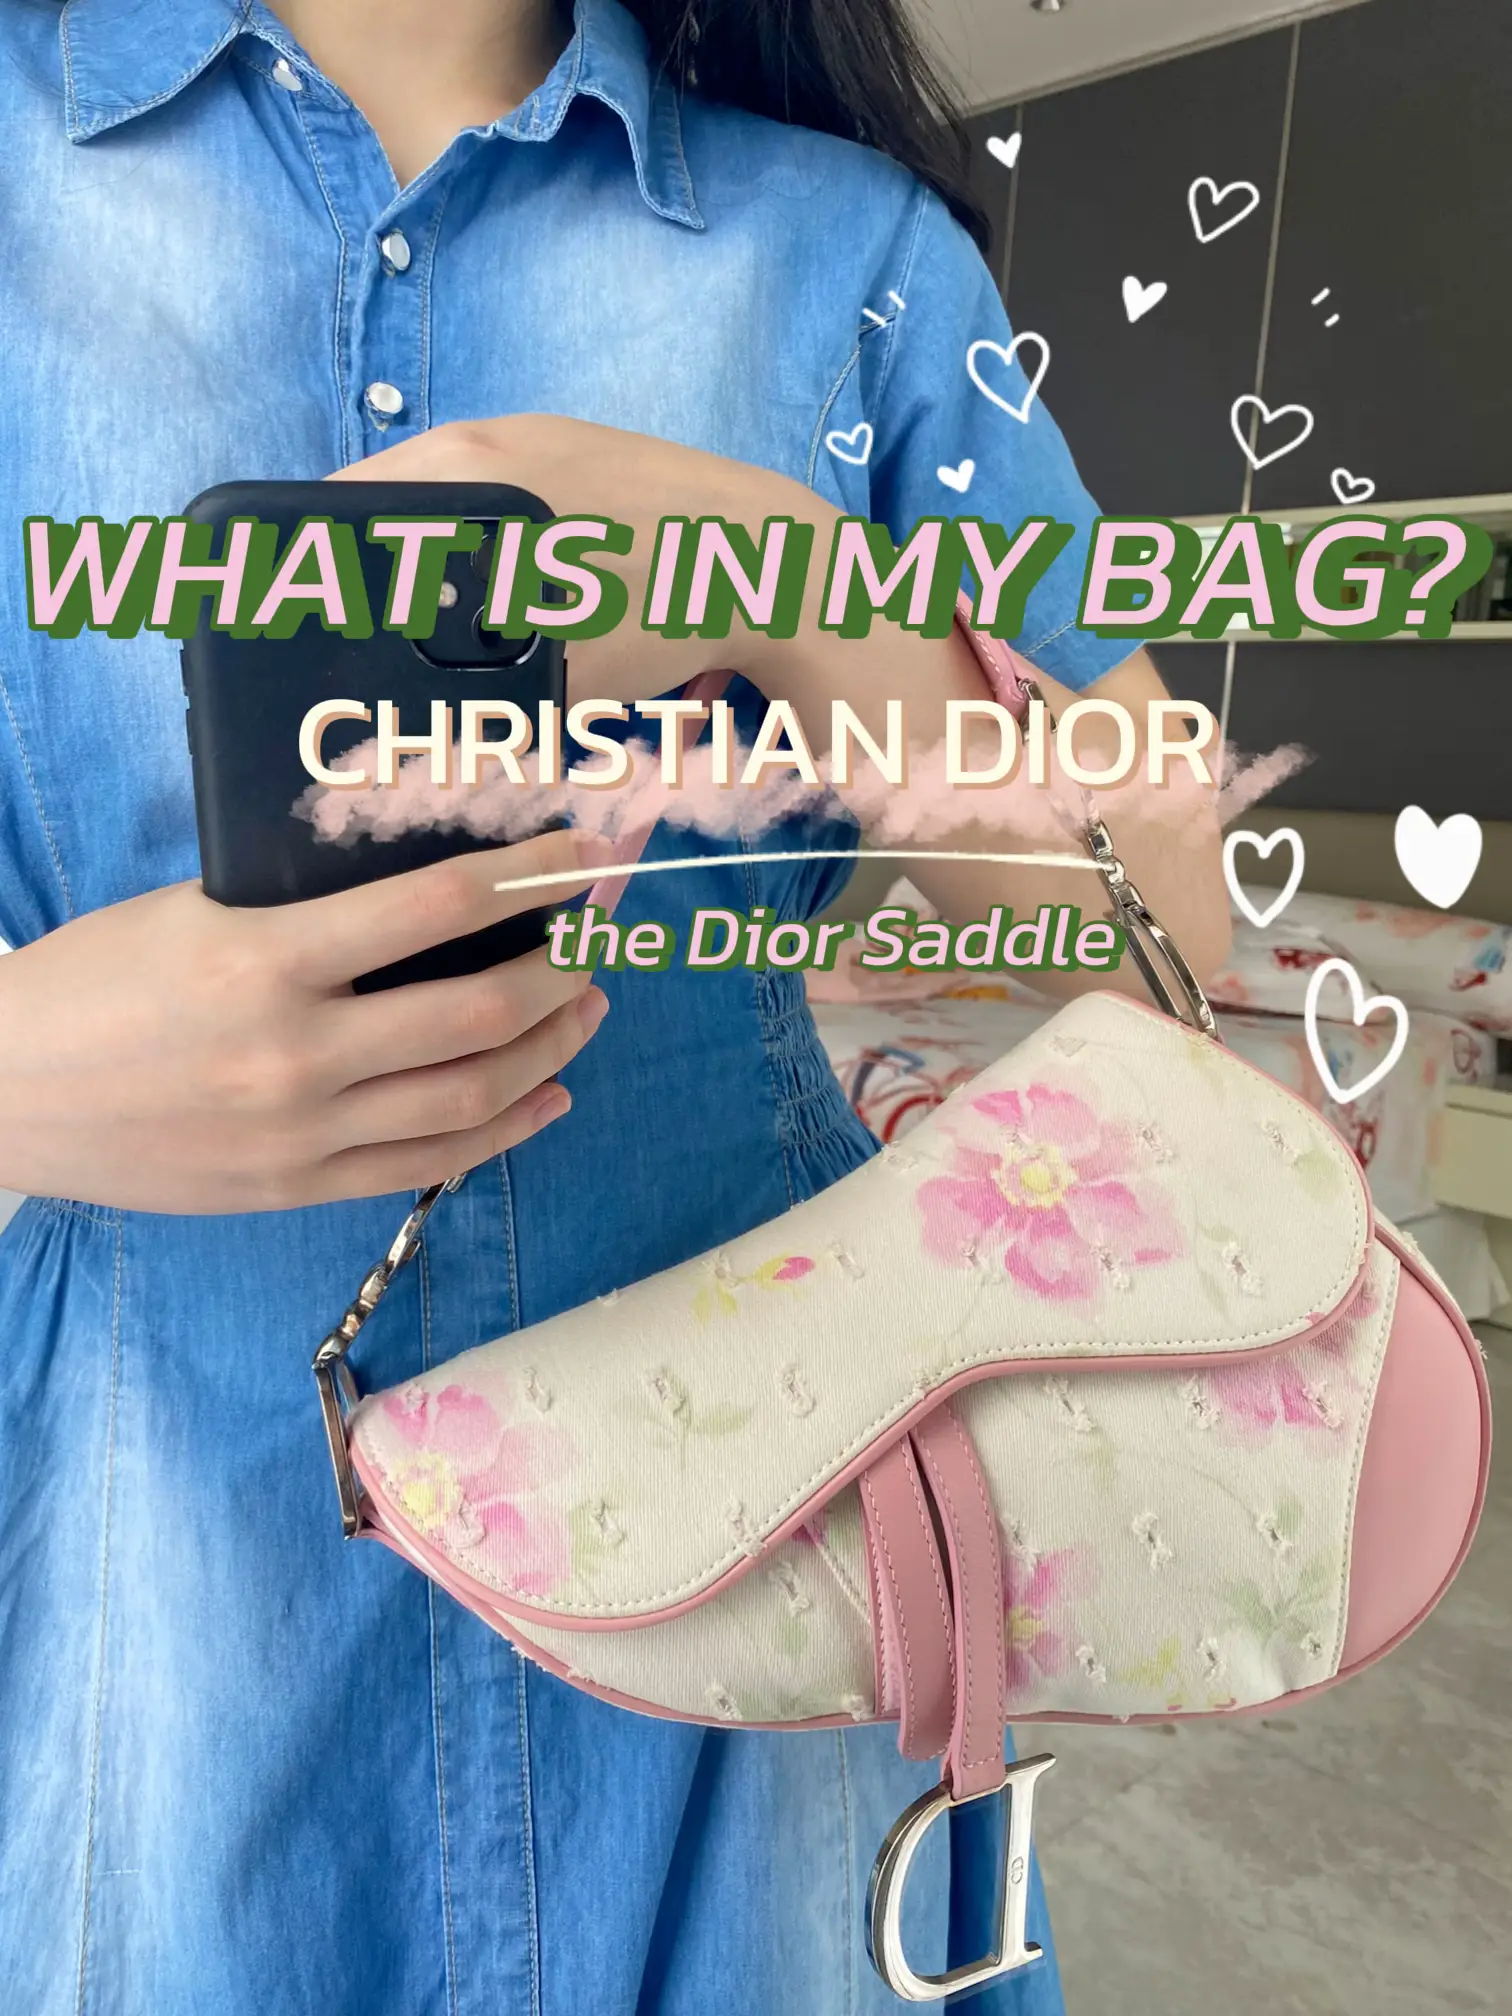 My 1st ever Dior bag!, Gallery posted by Hafiza